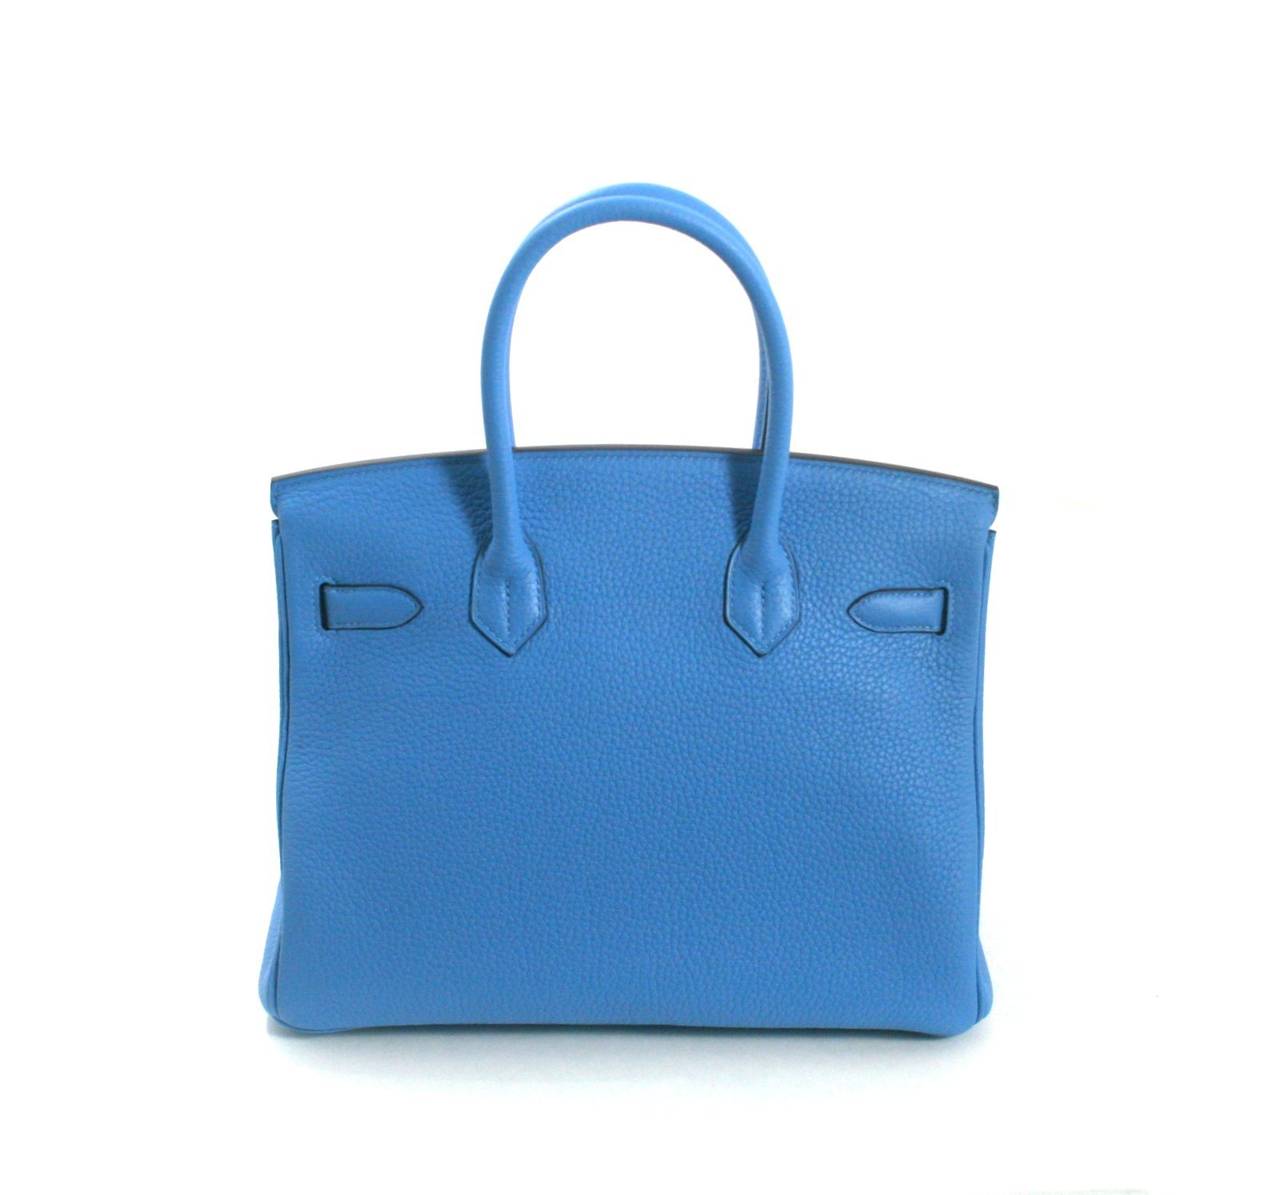 Never carried, this Bleu Paradis Clemence Leather 30 cm Birkin is in the newest shade of blue from Hermès.  It has been carefully stored with the protective felt and is absolutely immaculate.     Considered the ultimate luxury item the world over